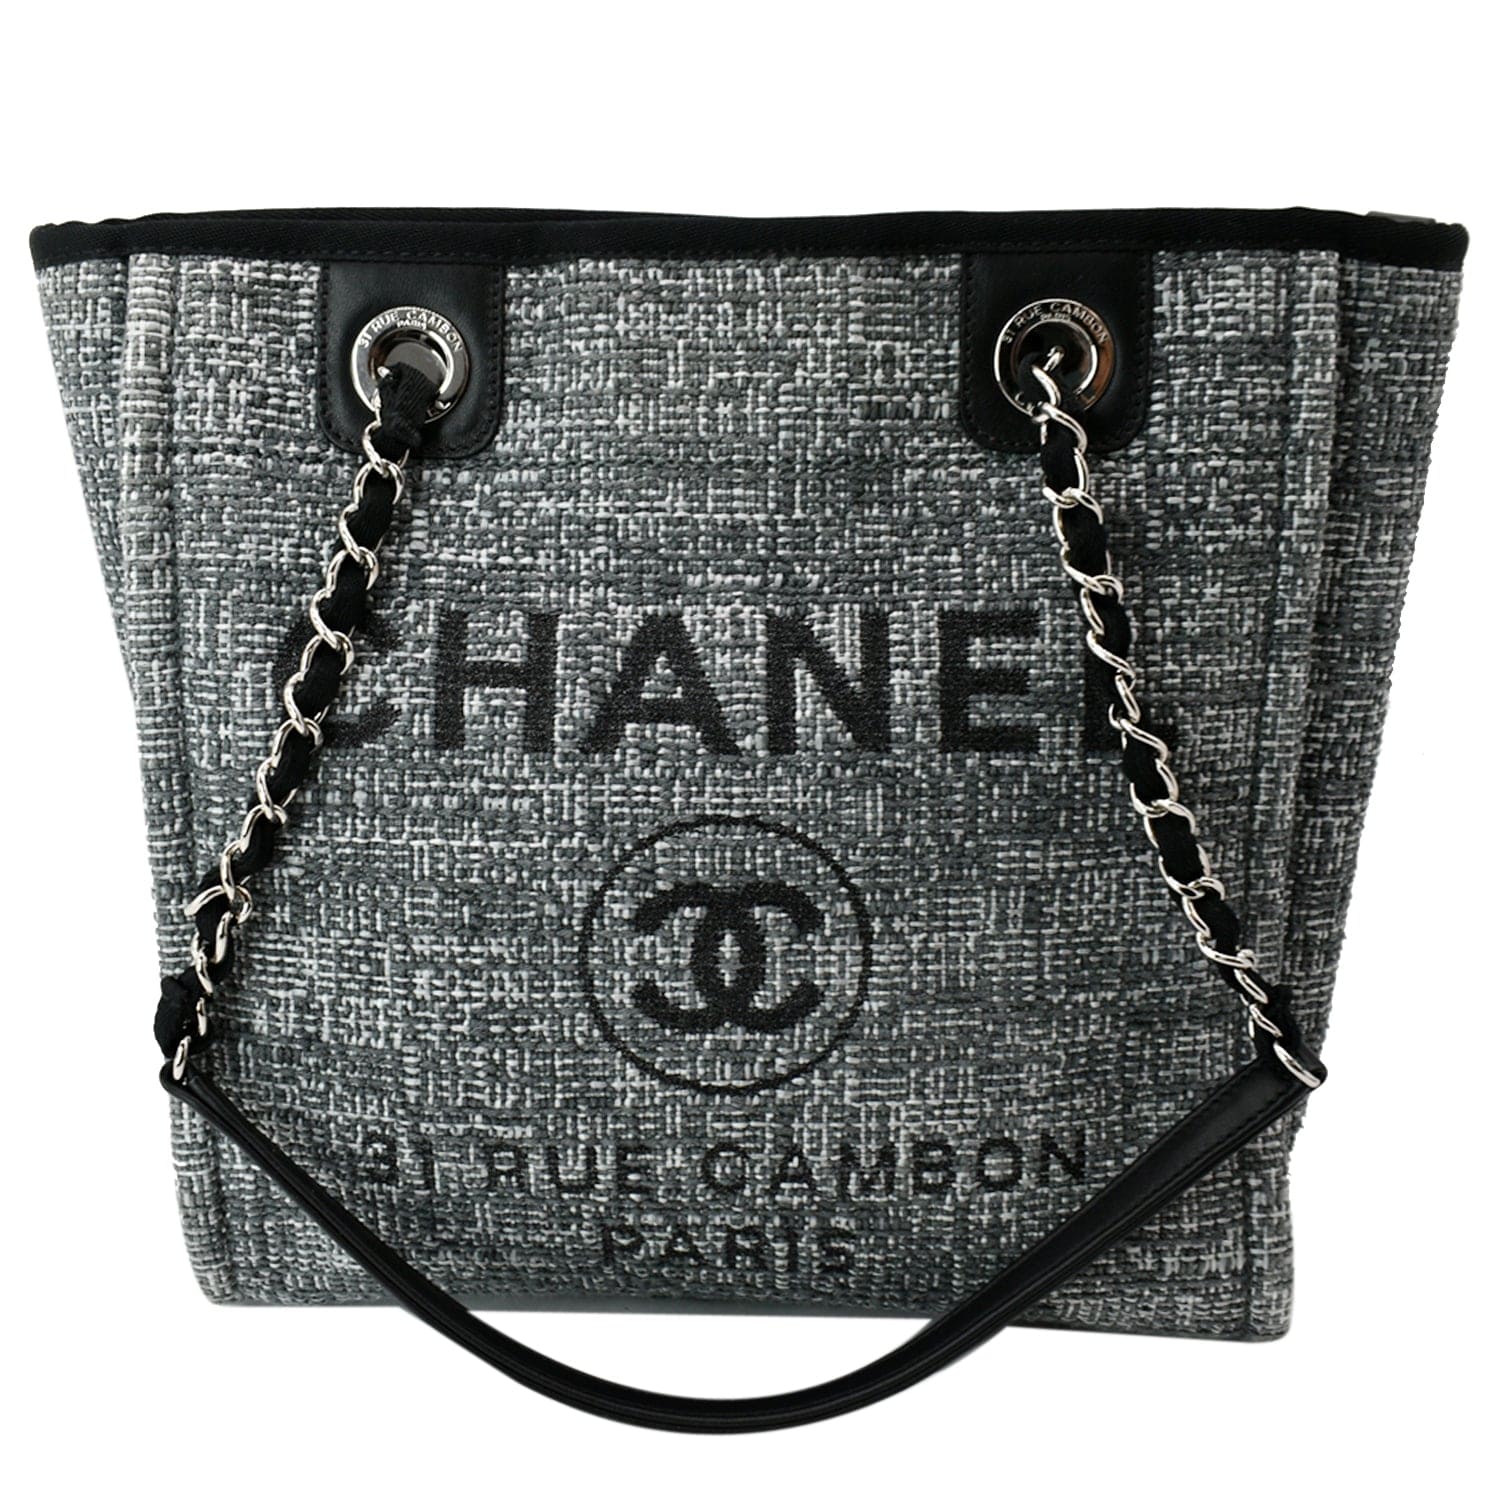 Chanel Navy Lurex Boucle Small Deauville Tote Bag – The Closet